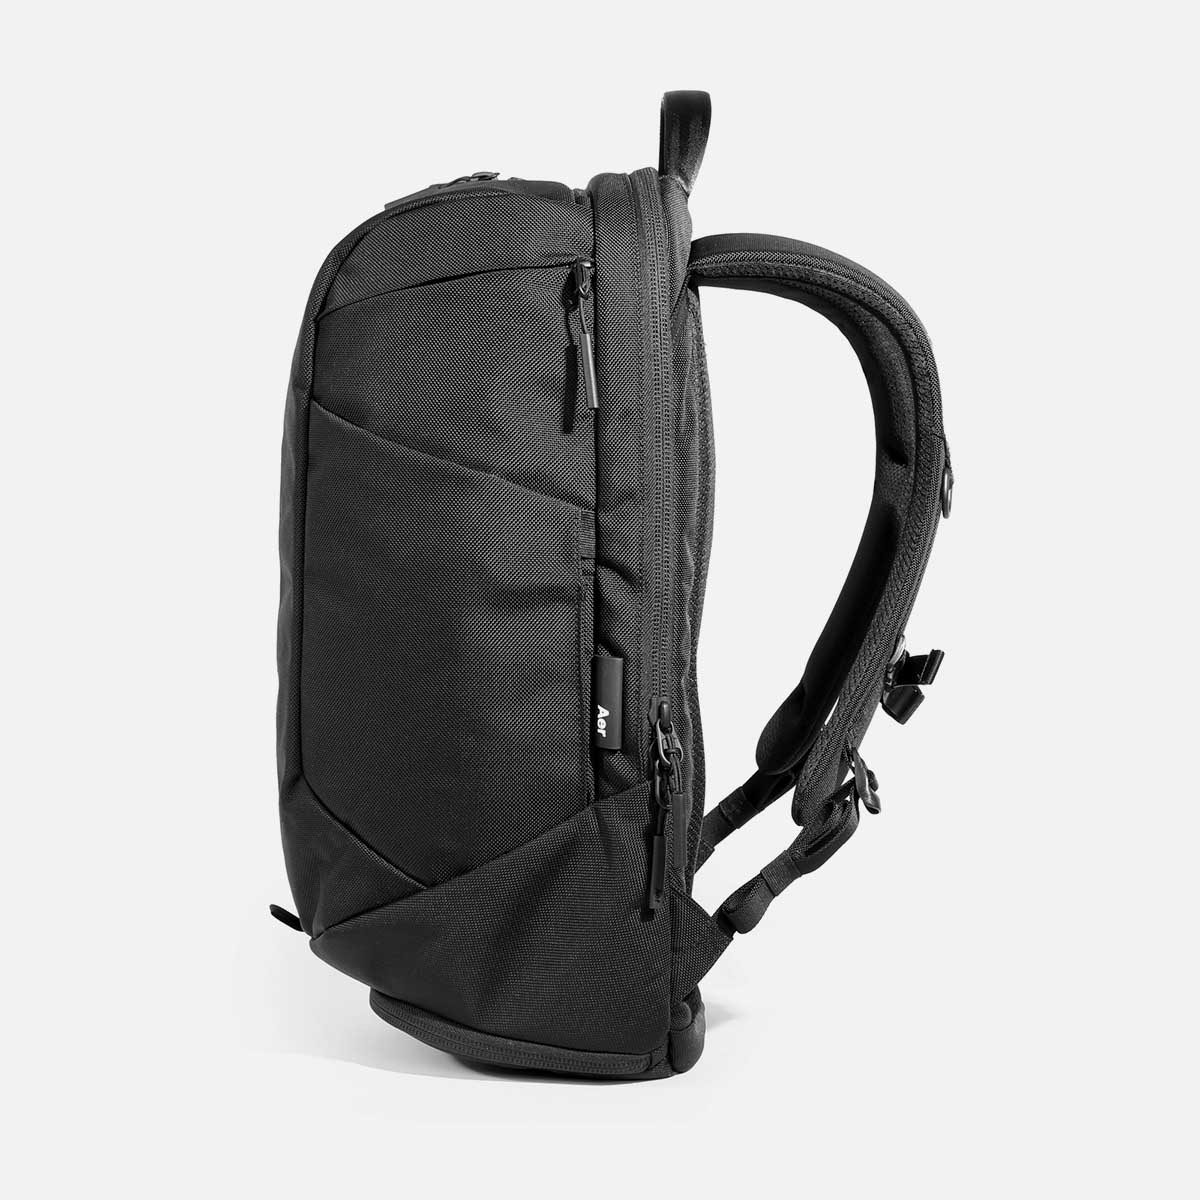 Duffel Pack 3 Black | Aer ｜ エアー公式通販サイト